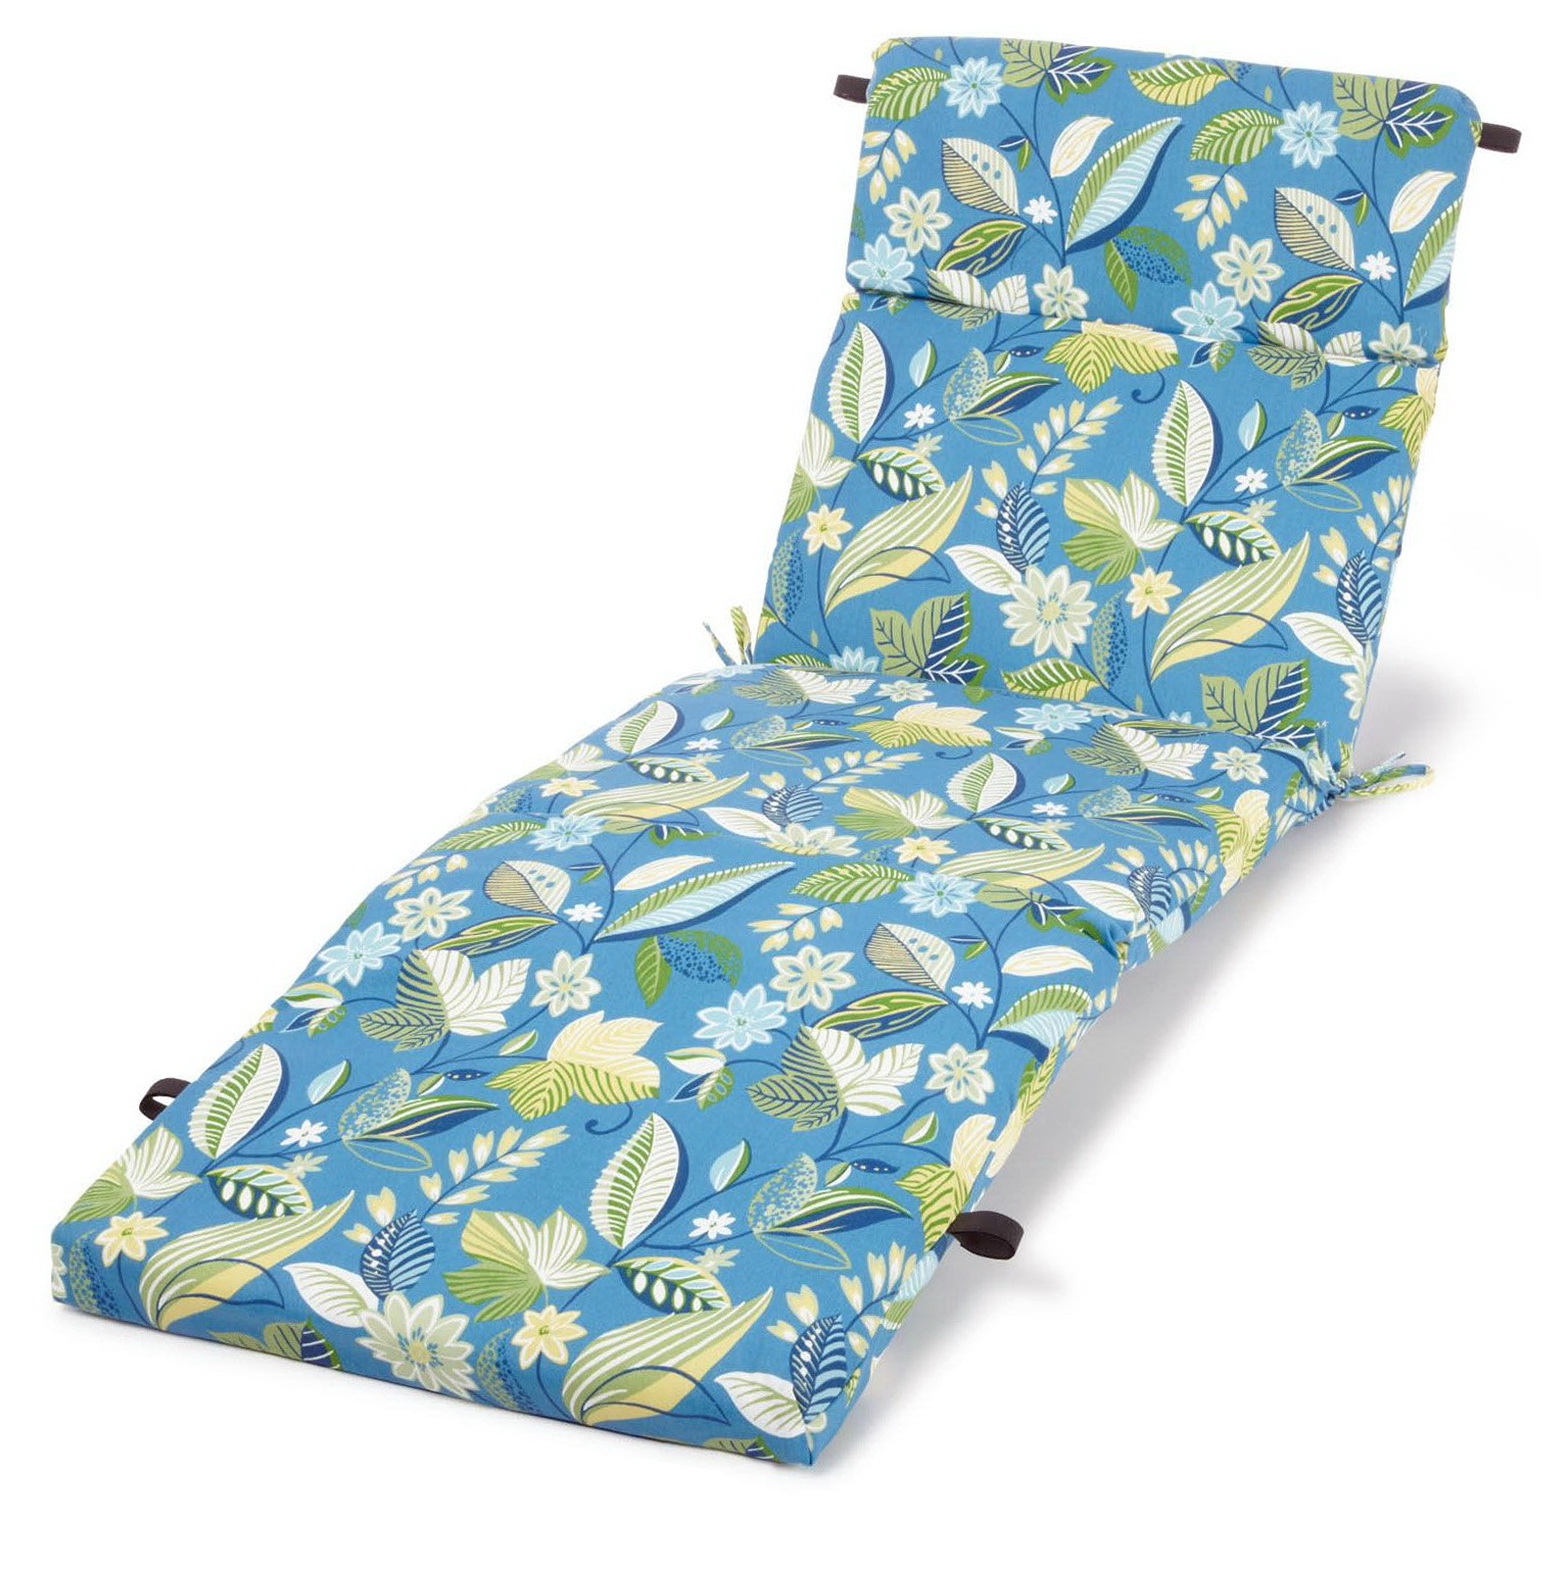 Outdoor Chaise Lounge Cushion Slipcovers | Home Design Ideas